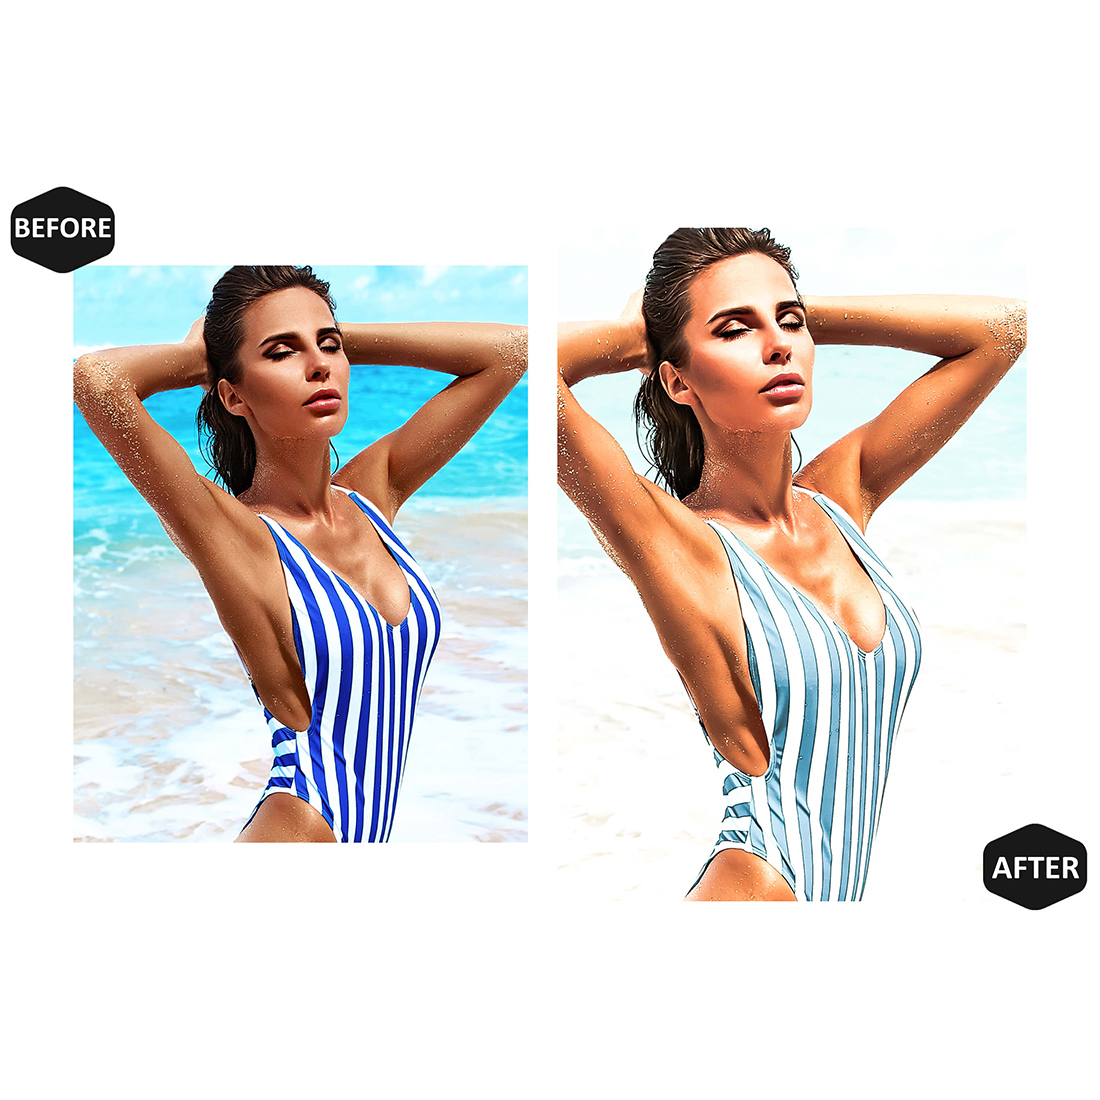 14 Photoshop Actions, Baby Blue Ps Action, Summer Bright ACR Preset, Cool Aqua Ps Filter, Atn Pictures And style Theme For Instagram, Blogger preview image.